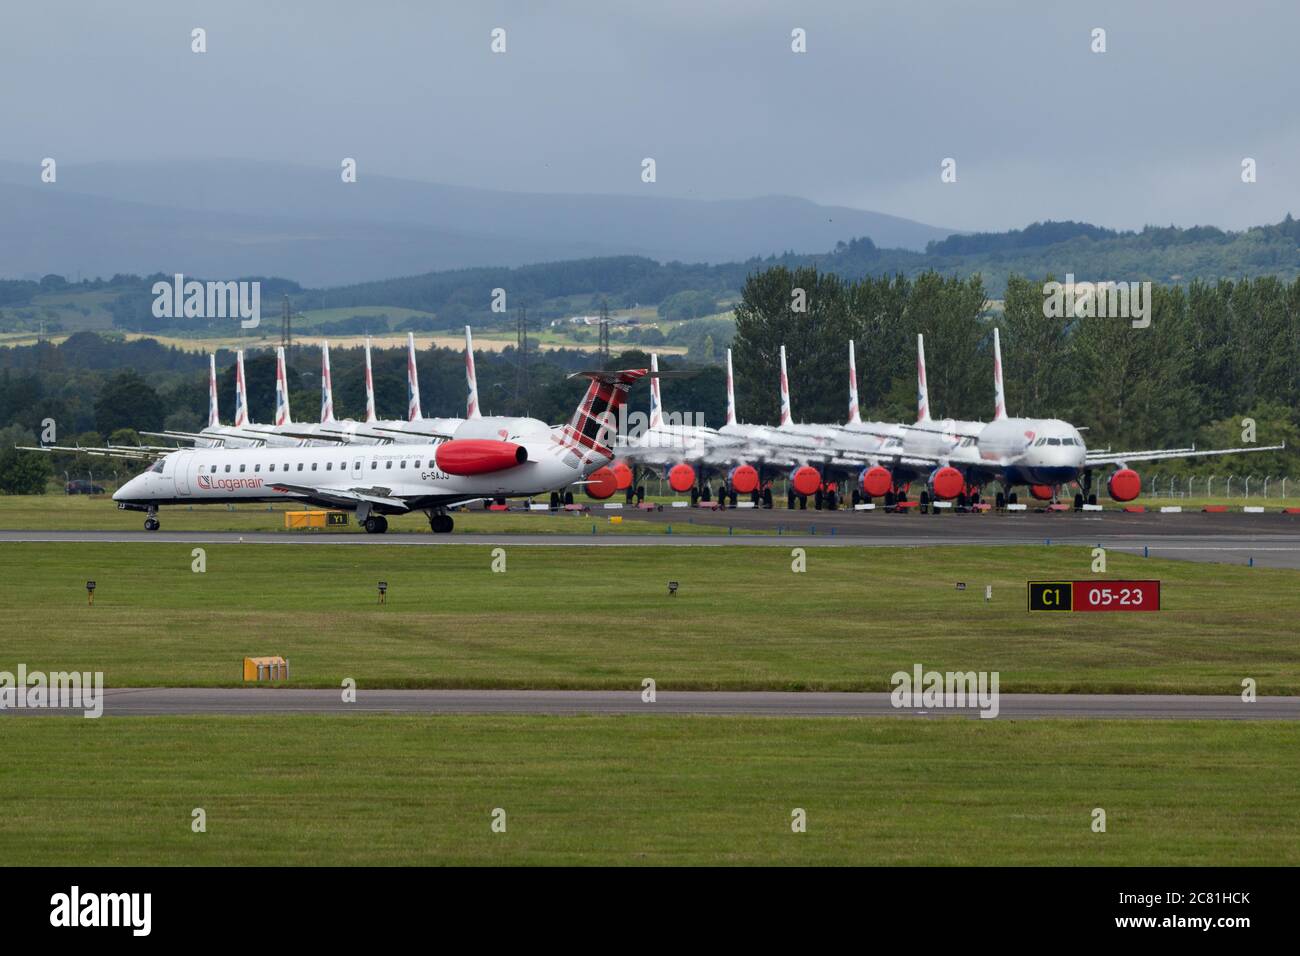 Glasgow, Scotland, UK. 20th July, 2020. Pictured: Loganair Embraer ERJ145 plane seen at Glasgow Airport with a large group of grounded British Airways (BA) airbus aircraft in the background. Loganair had taken over some of Flybe's slots after the collapse of Flybe, then the coronavirus lockdown hit in March, and since then Loganair have been increasing services but these are turbulent times for all airlines and the global aviation industry. Credit: Colin Fisher/Alamy Live News Stock Photo